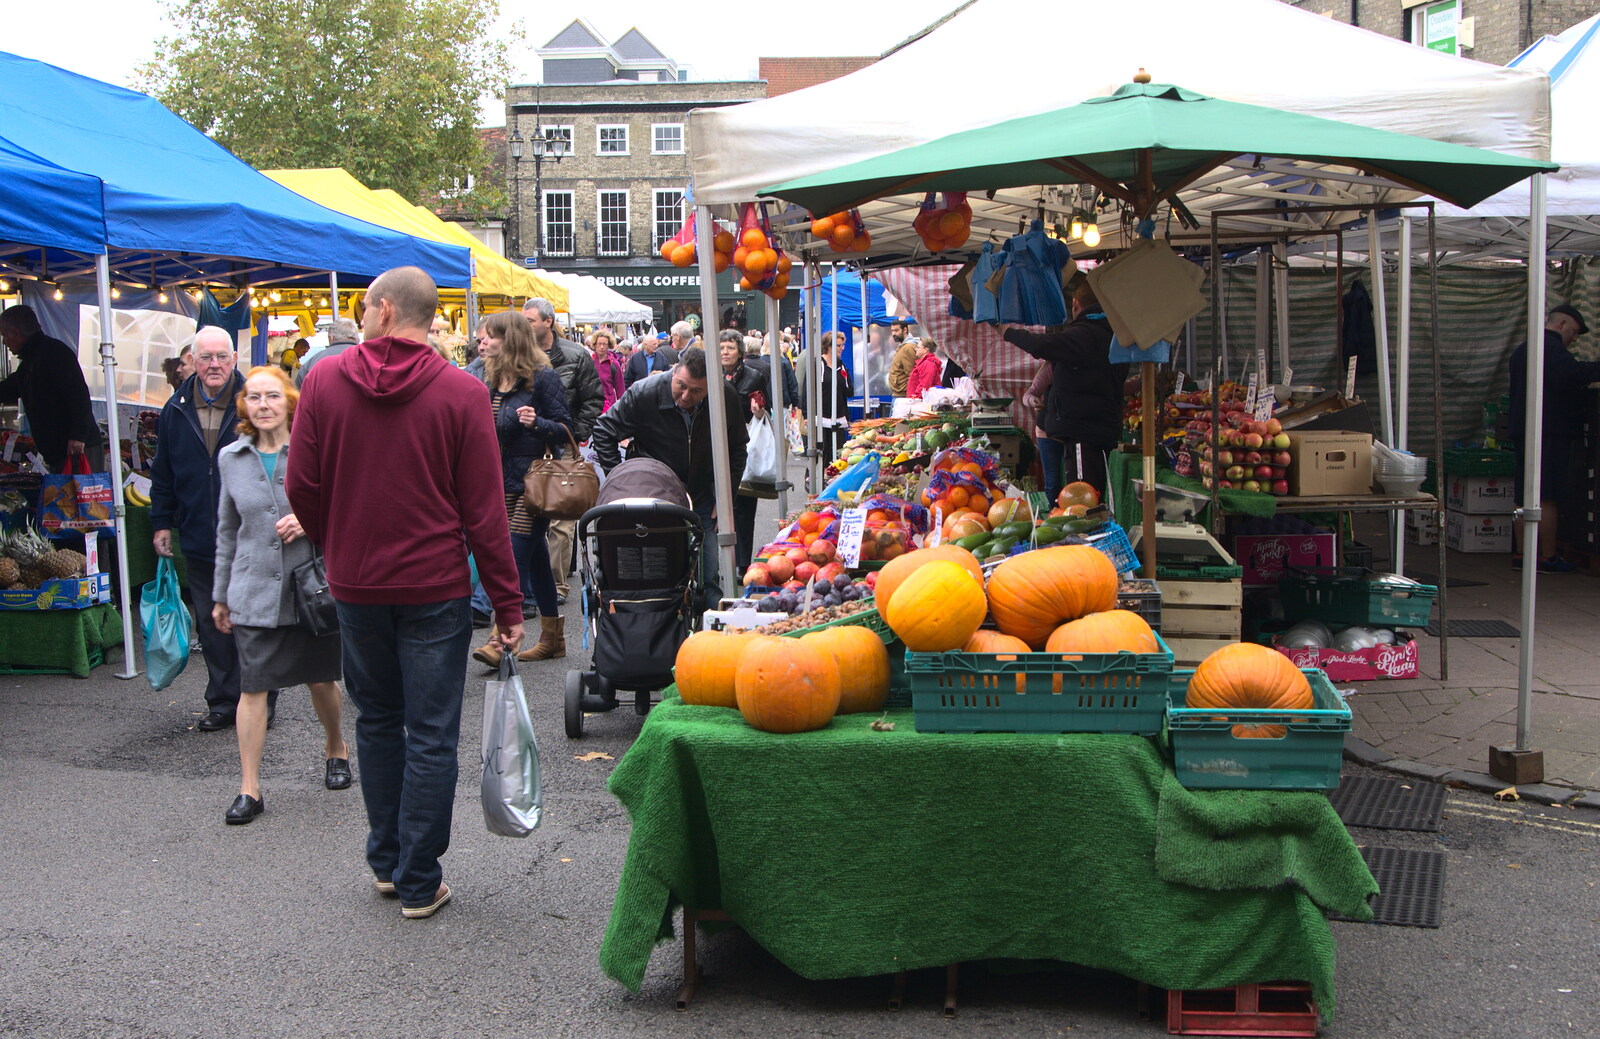 Pumkins on the market in Bury from A Trip to Abbey Gardens, Bury St. Edmunds, Suffolk - 29th October 2014